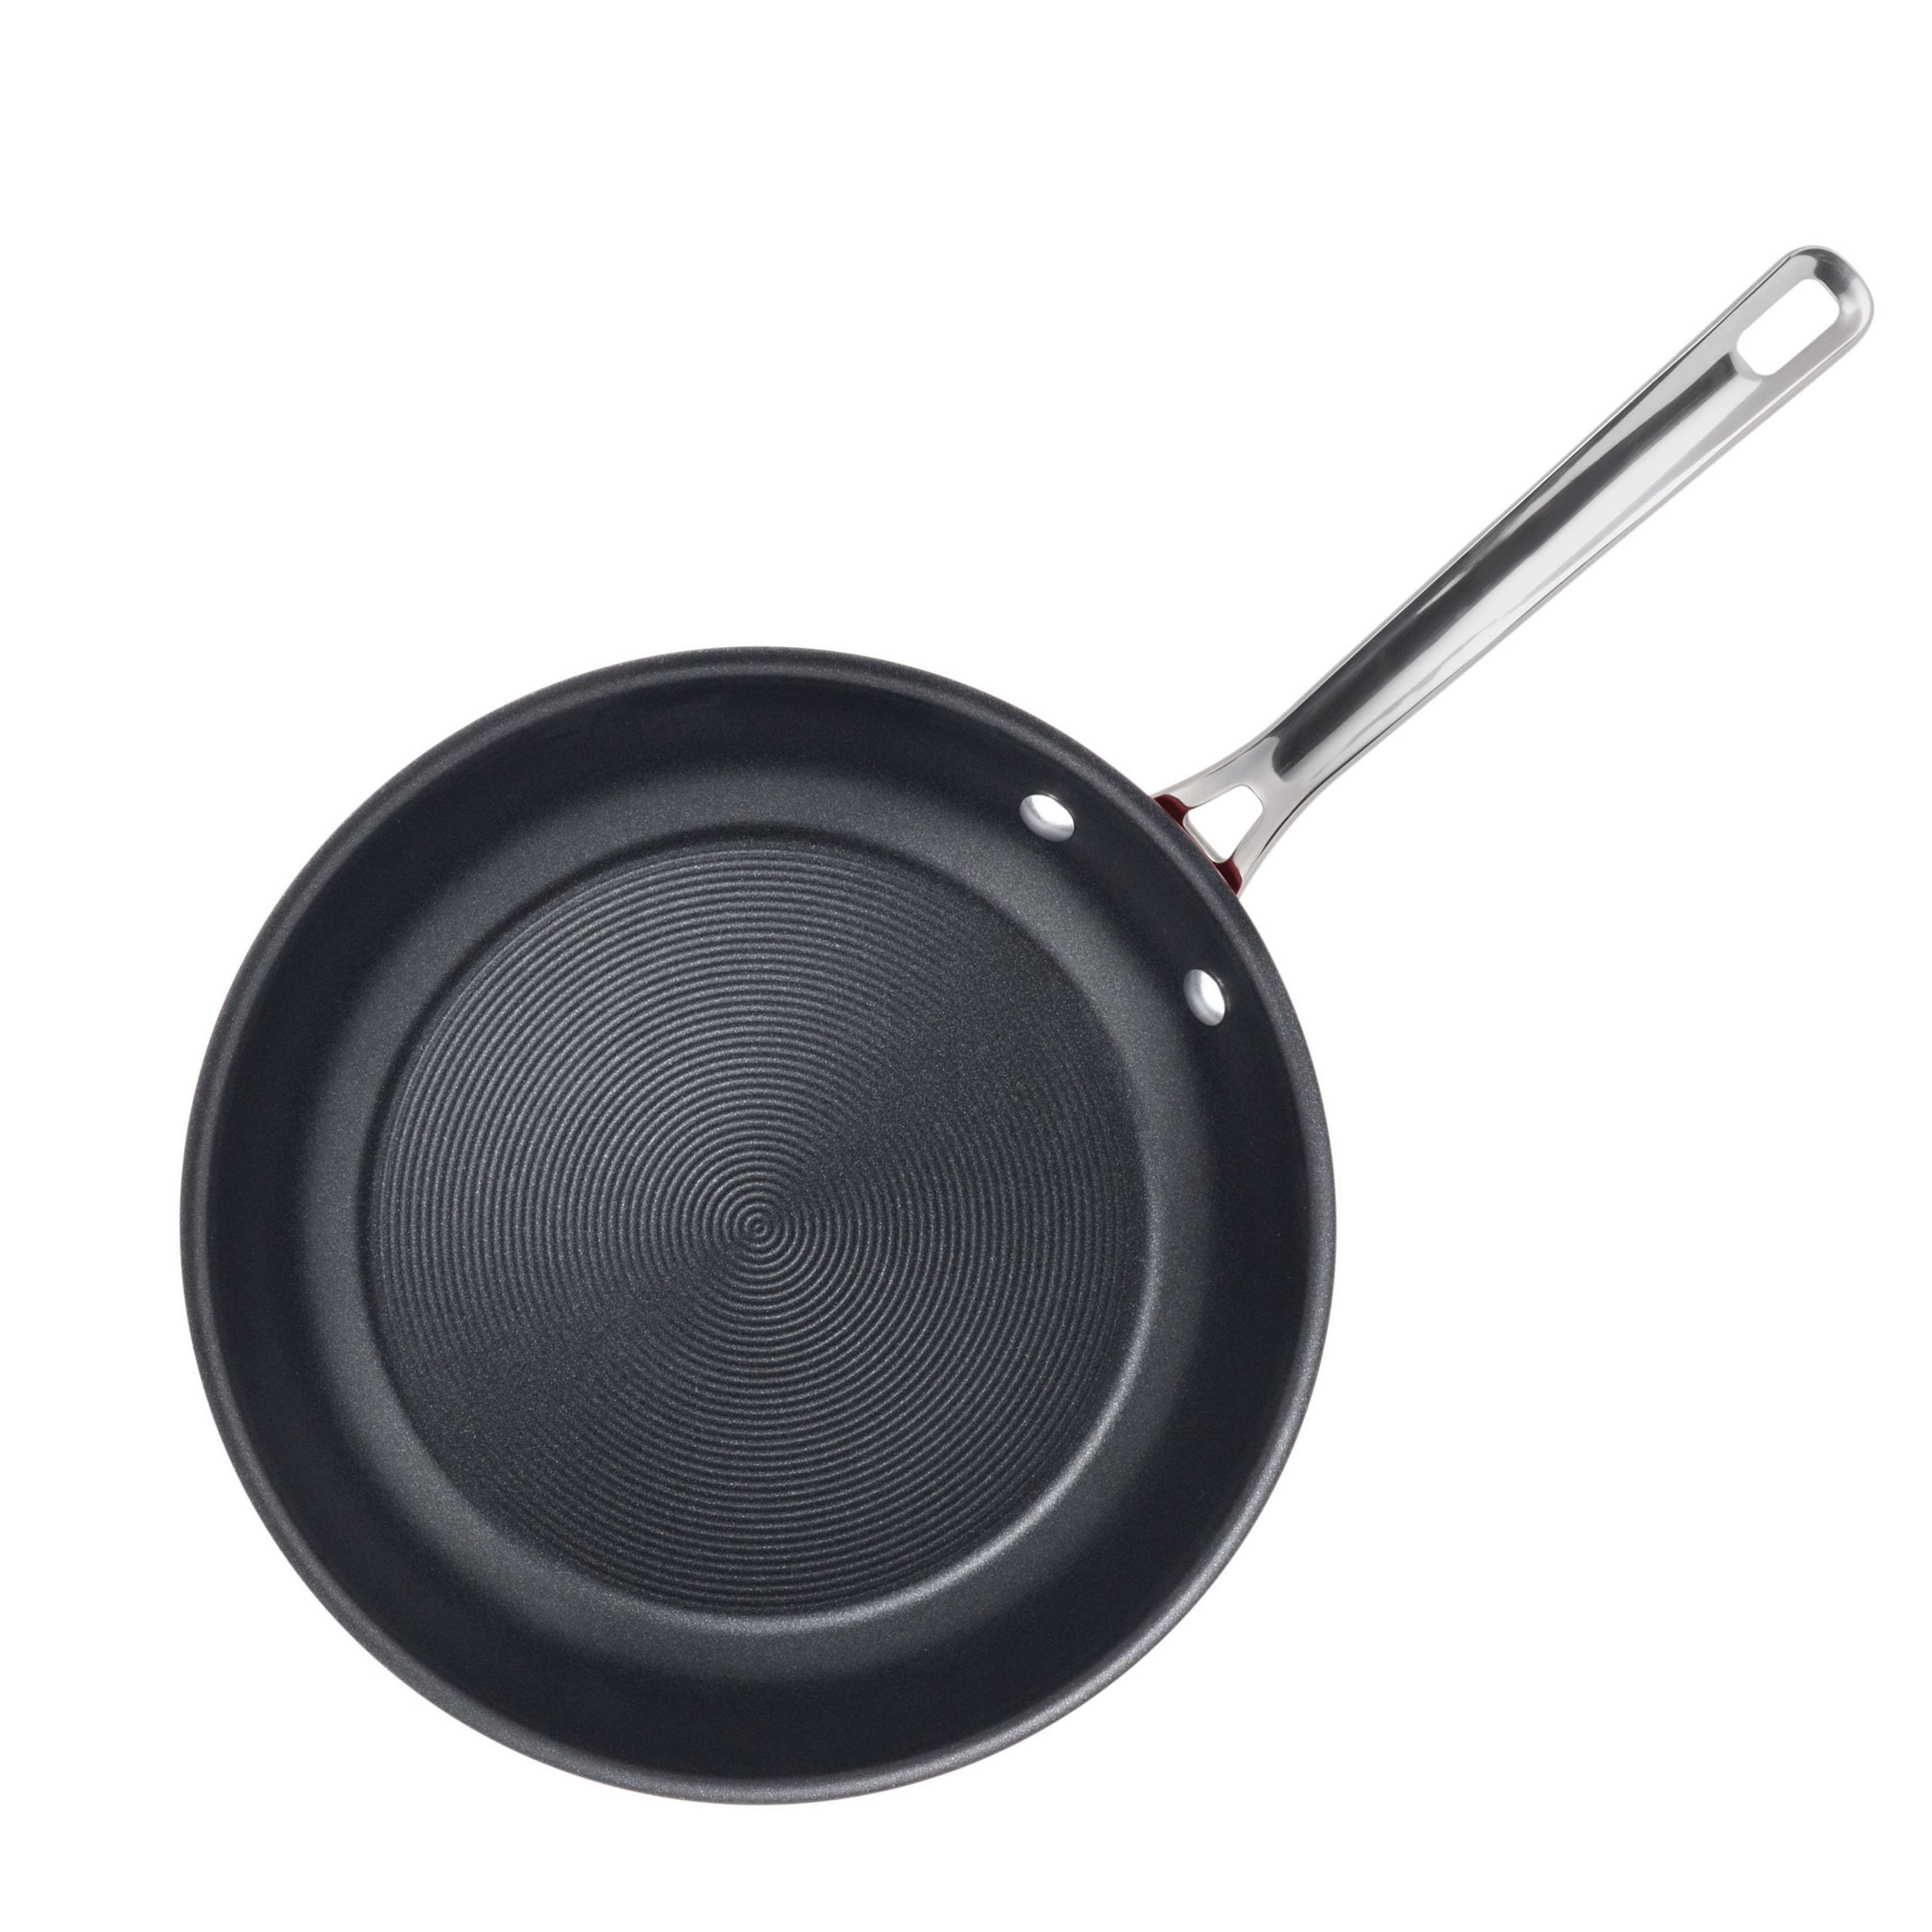 https://ak1.ostkcdn.com/images/products/9206716/Circulon-Genesis-Hard-Anodized-Nonstick-9.25-inch-and-10.75-inch-French-Skillets-5090d0dc-2e24-4e05-97c7-e982b411ff33.jpg